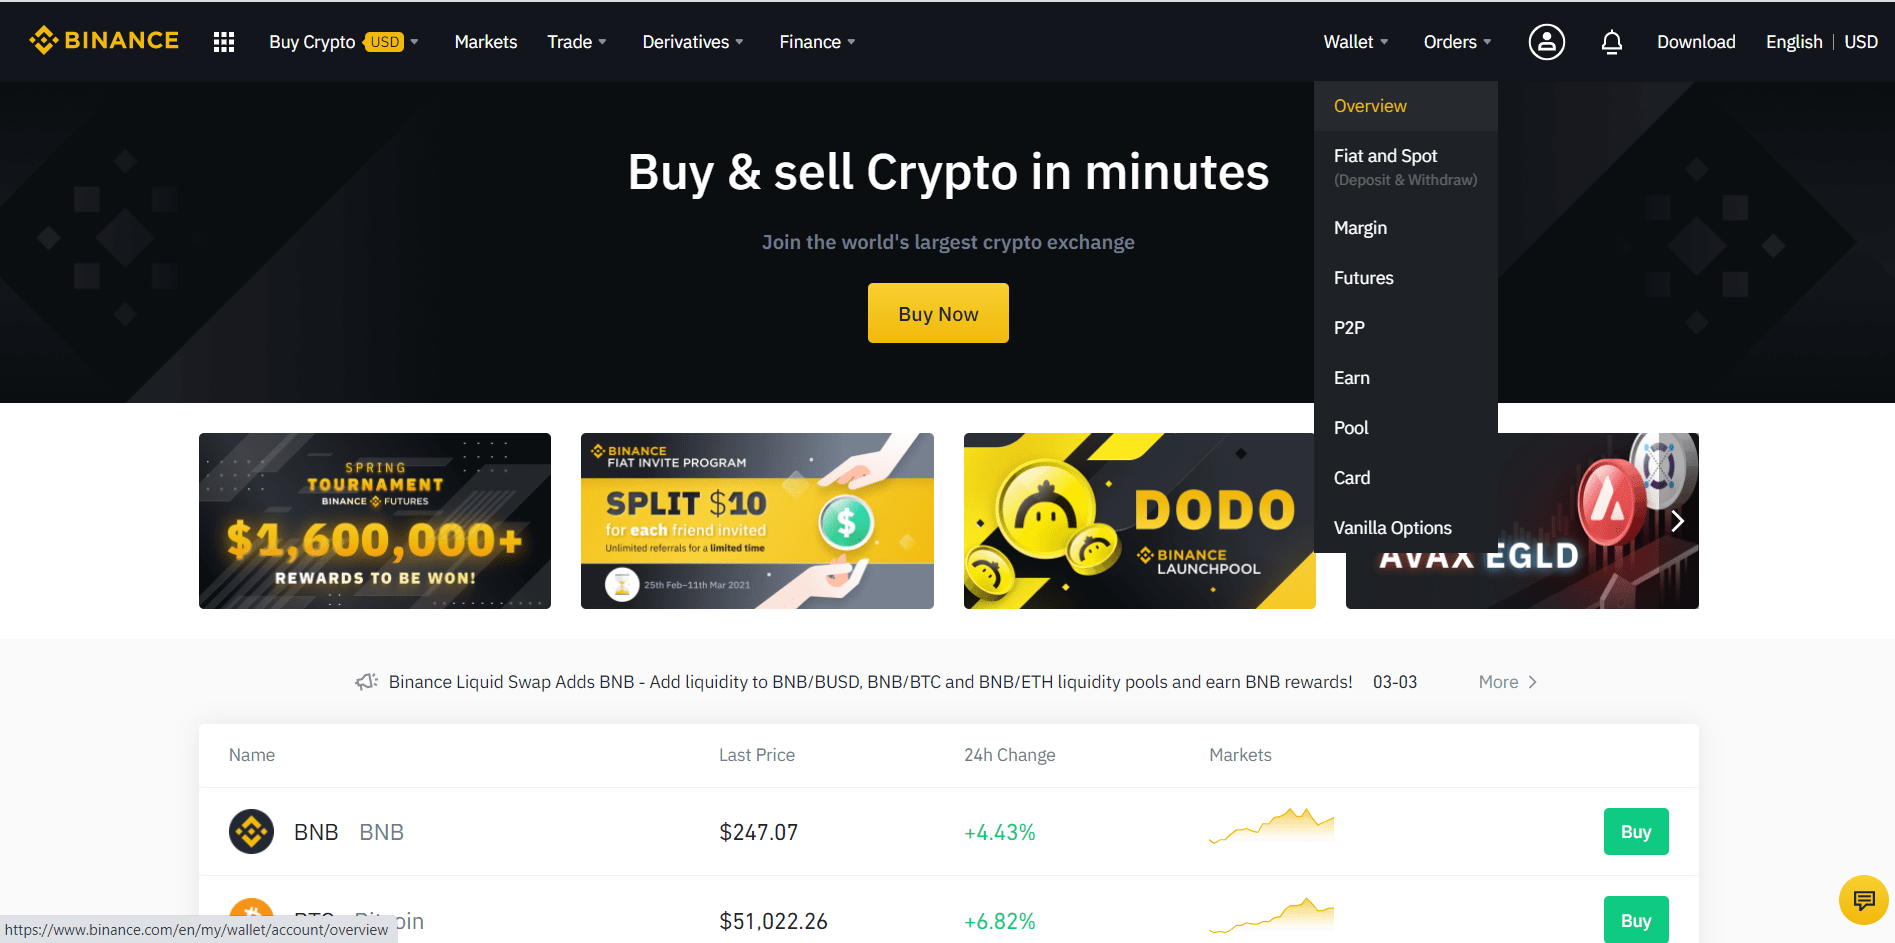 Deposit funds on Binance and buy DOGE